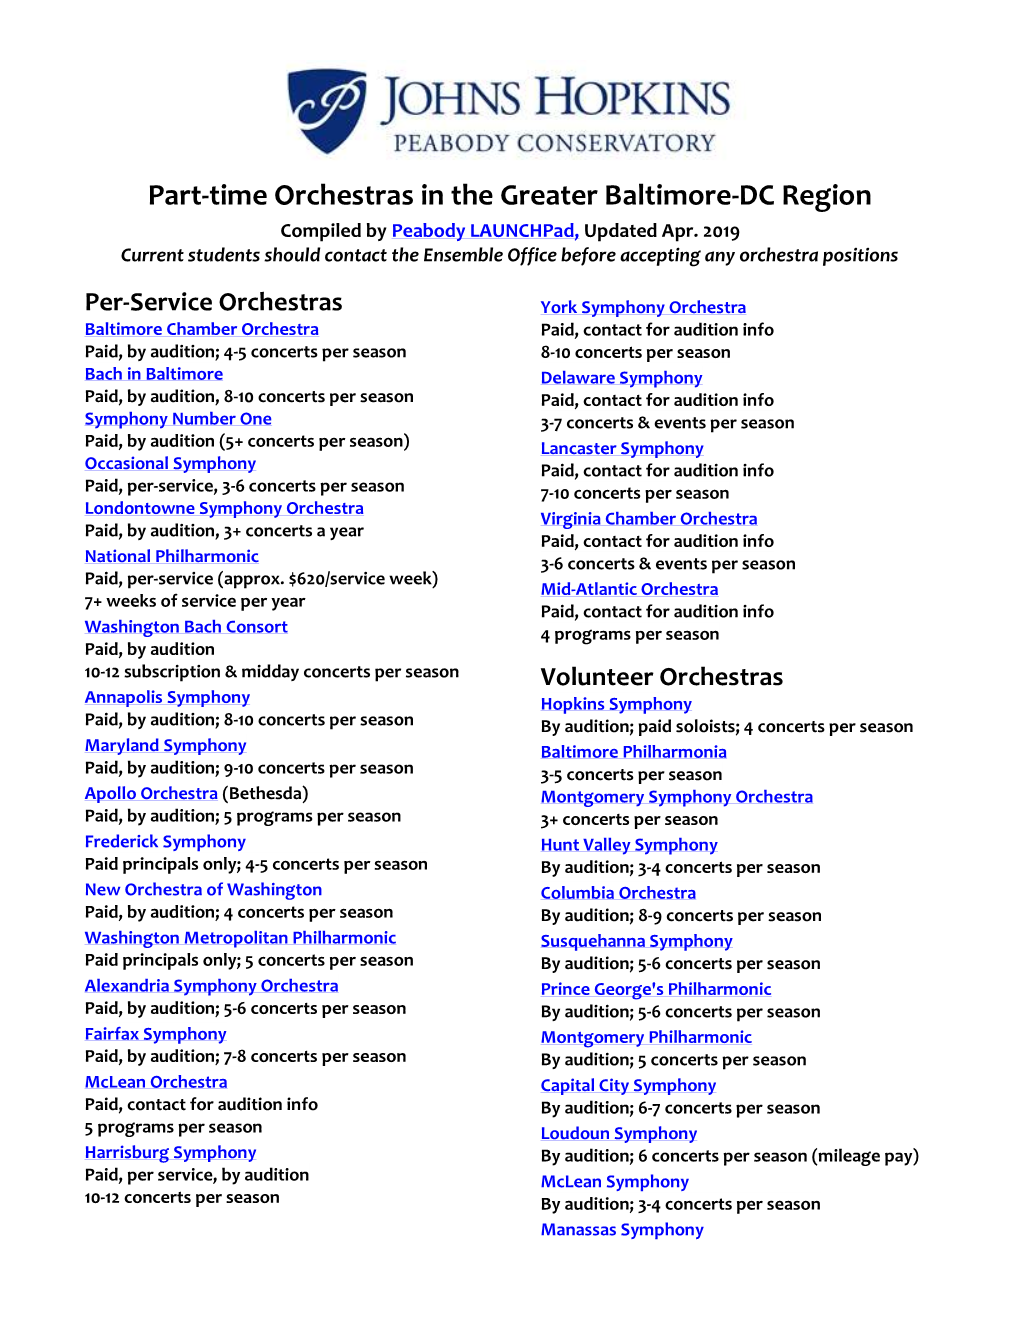 Part-Time Orchestras in the Greater Baltimore-DC Region Compiled by Peabody Launchpad, Updated Apr